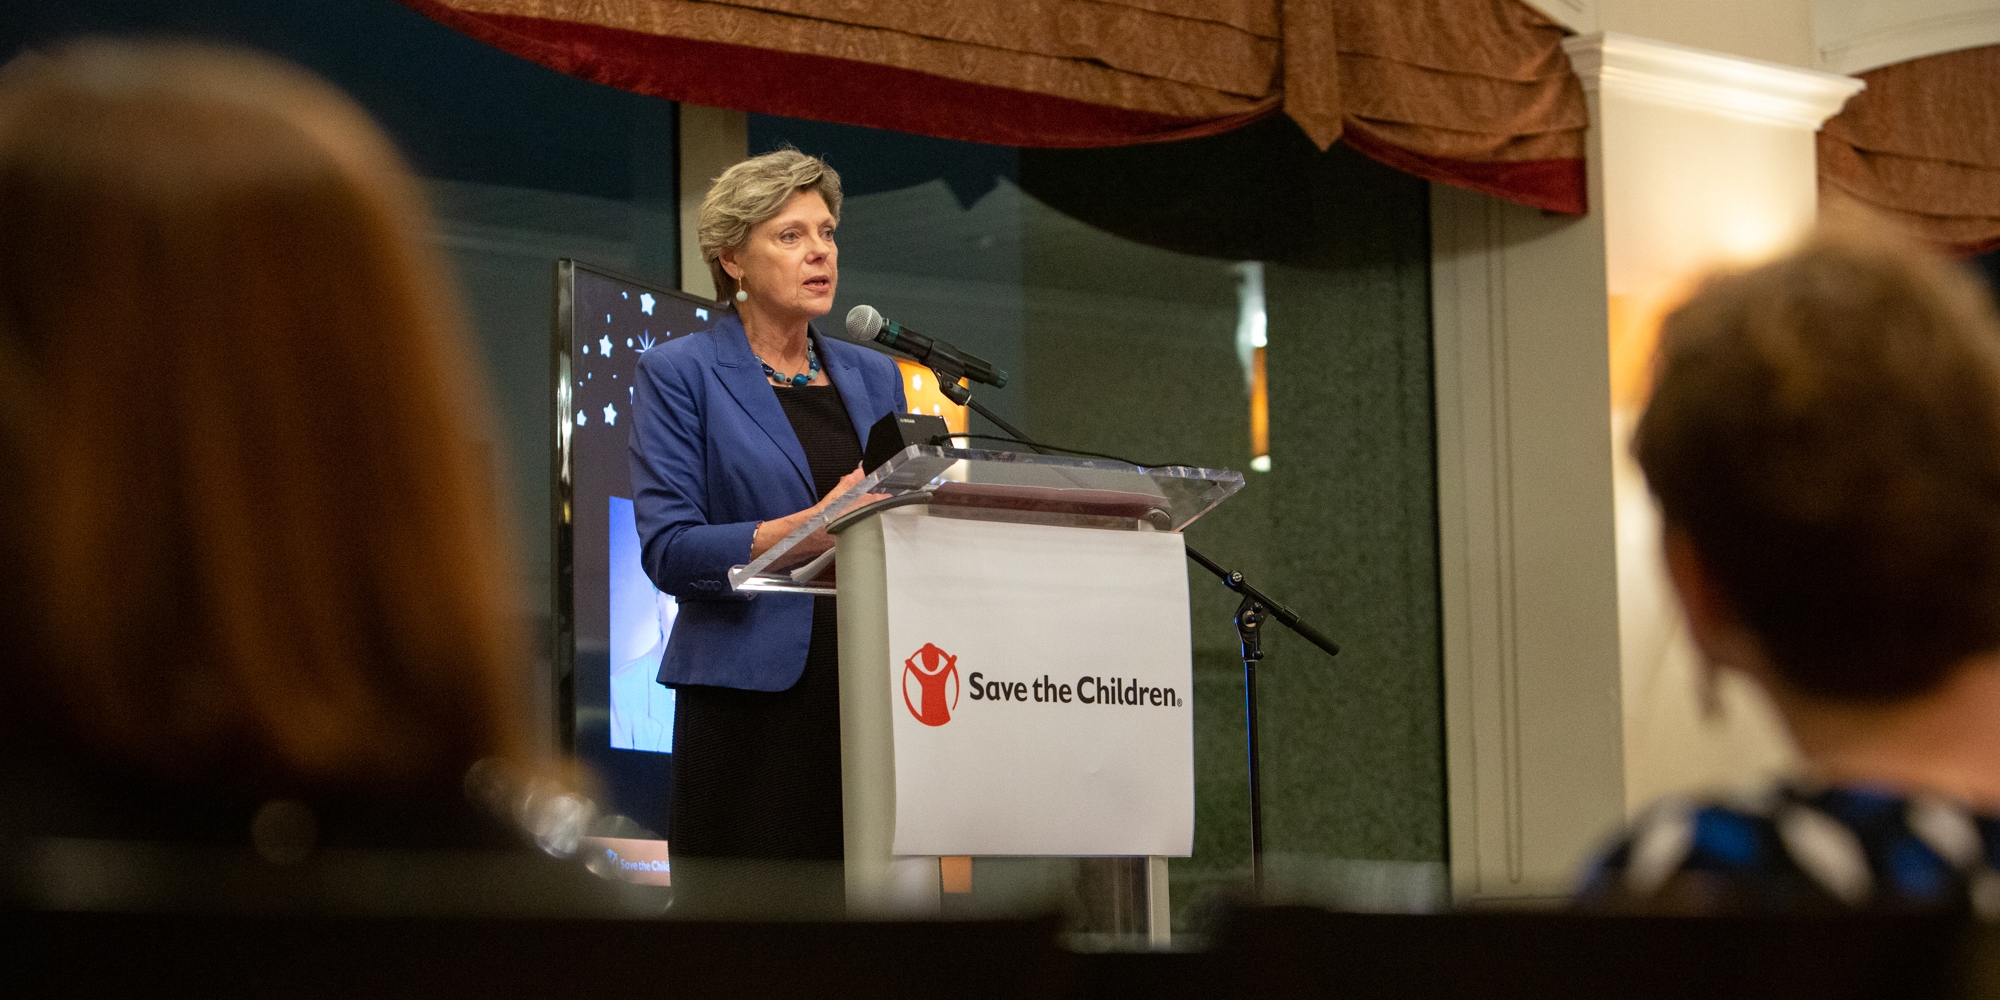 Renowned author, journalist and commentator Cokie Roberts of ABC News and NPR speaks at Save the Children’s Boston Leadership Council Benefit at the Downtown Harvard Club in Boston on November 2, 2018. (Photo by Casey Atkins for Save the Children)